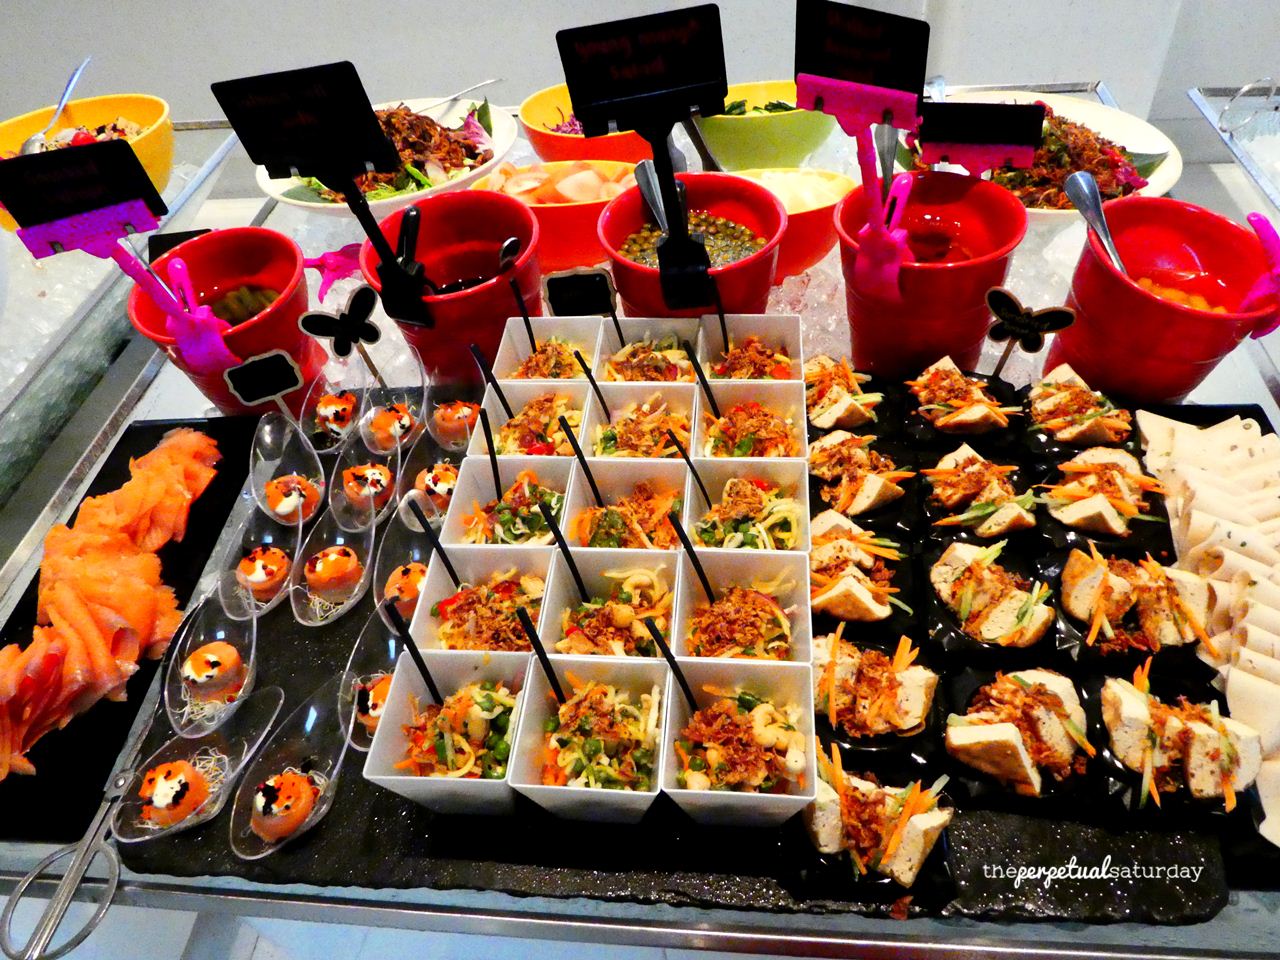 Buffet review at Nook by Aloft KL